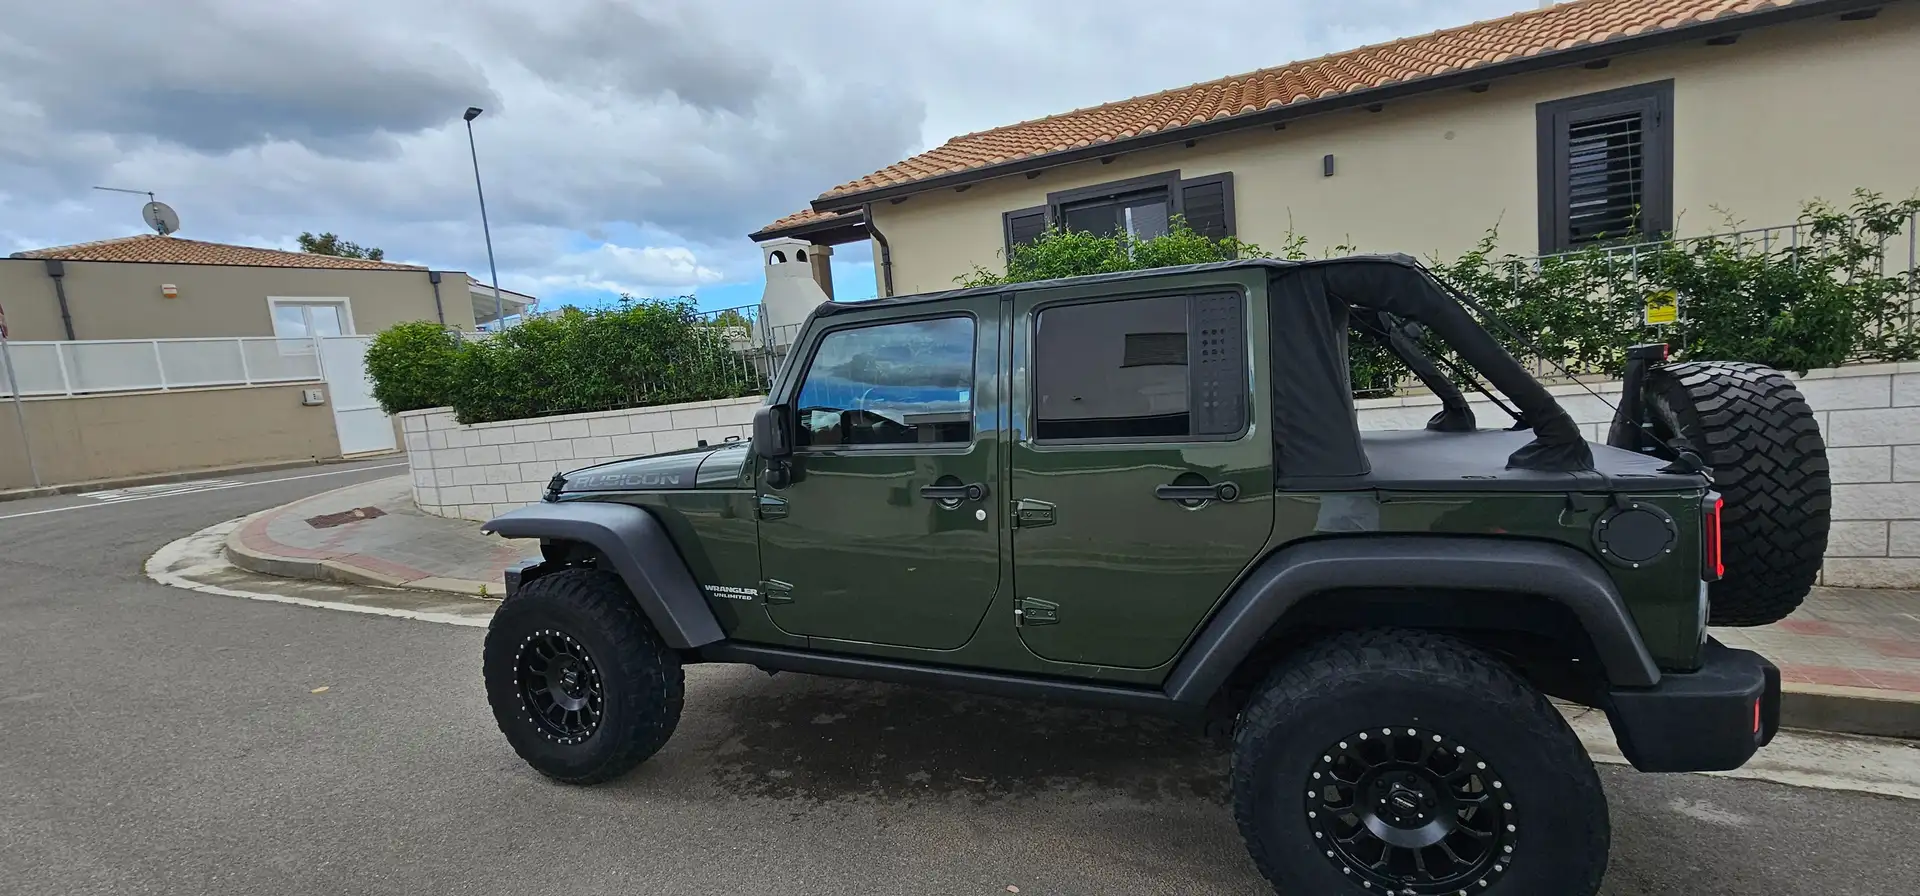 Jeep Wrangler Wrangler 2007 Unlimited Unlimited 2.8 crd Rubicon Verde - 1